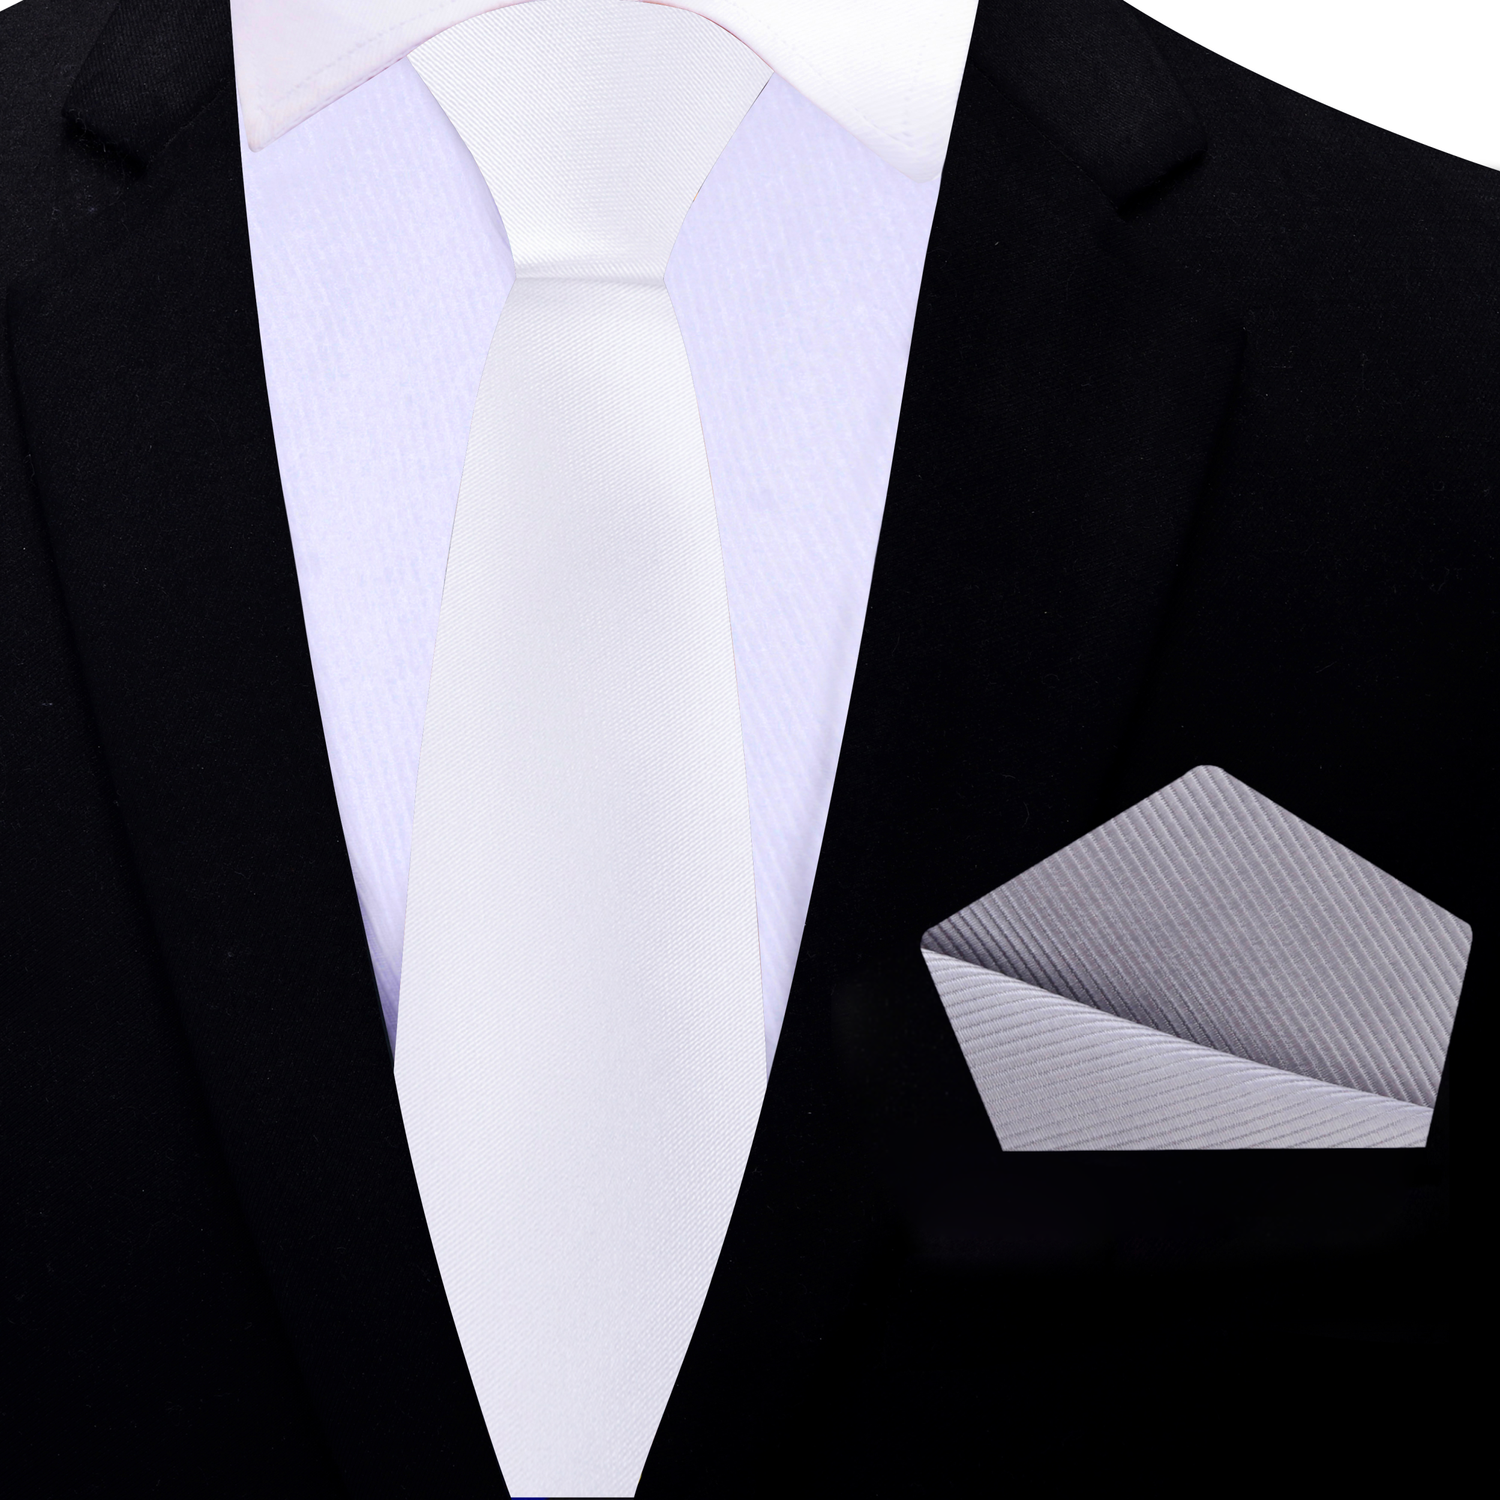 Thin Tie: Solid White Tie with Silver Square